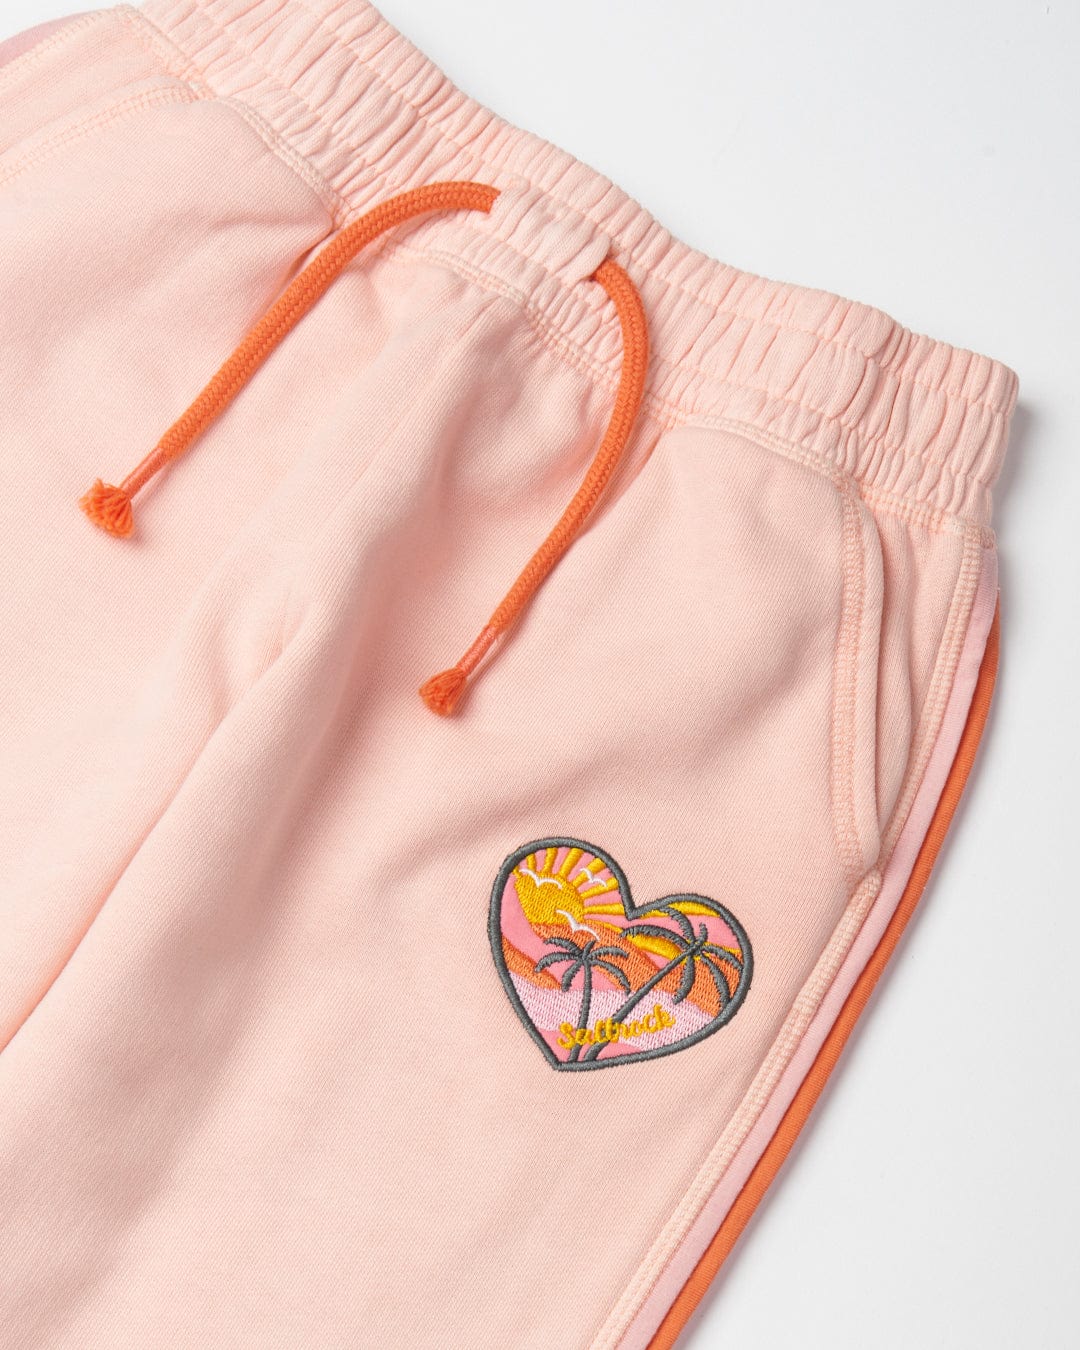 Close-up of Sunshine State - Kids Joggers - Peach with an orange drawstring and an embroidered heart patch. The patch features a sunset with palm trees and the word "sunset." Made from 100% cotton, these joggers from Saltrock offer a soft hand feel and have an elasticated waistband for ultimate comfort.